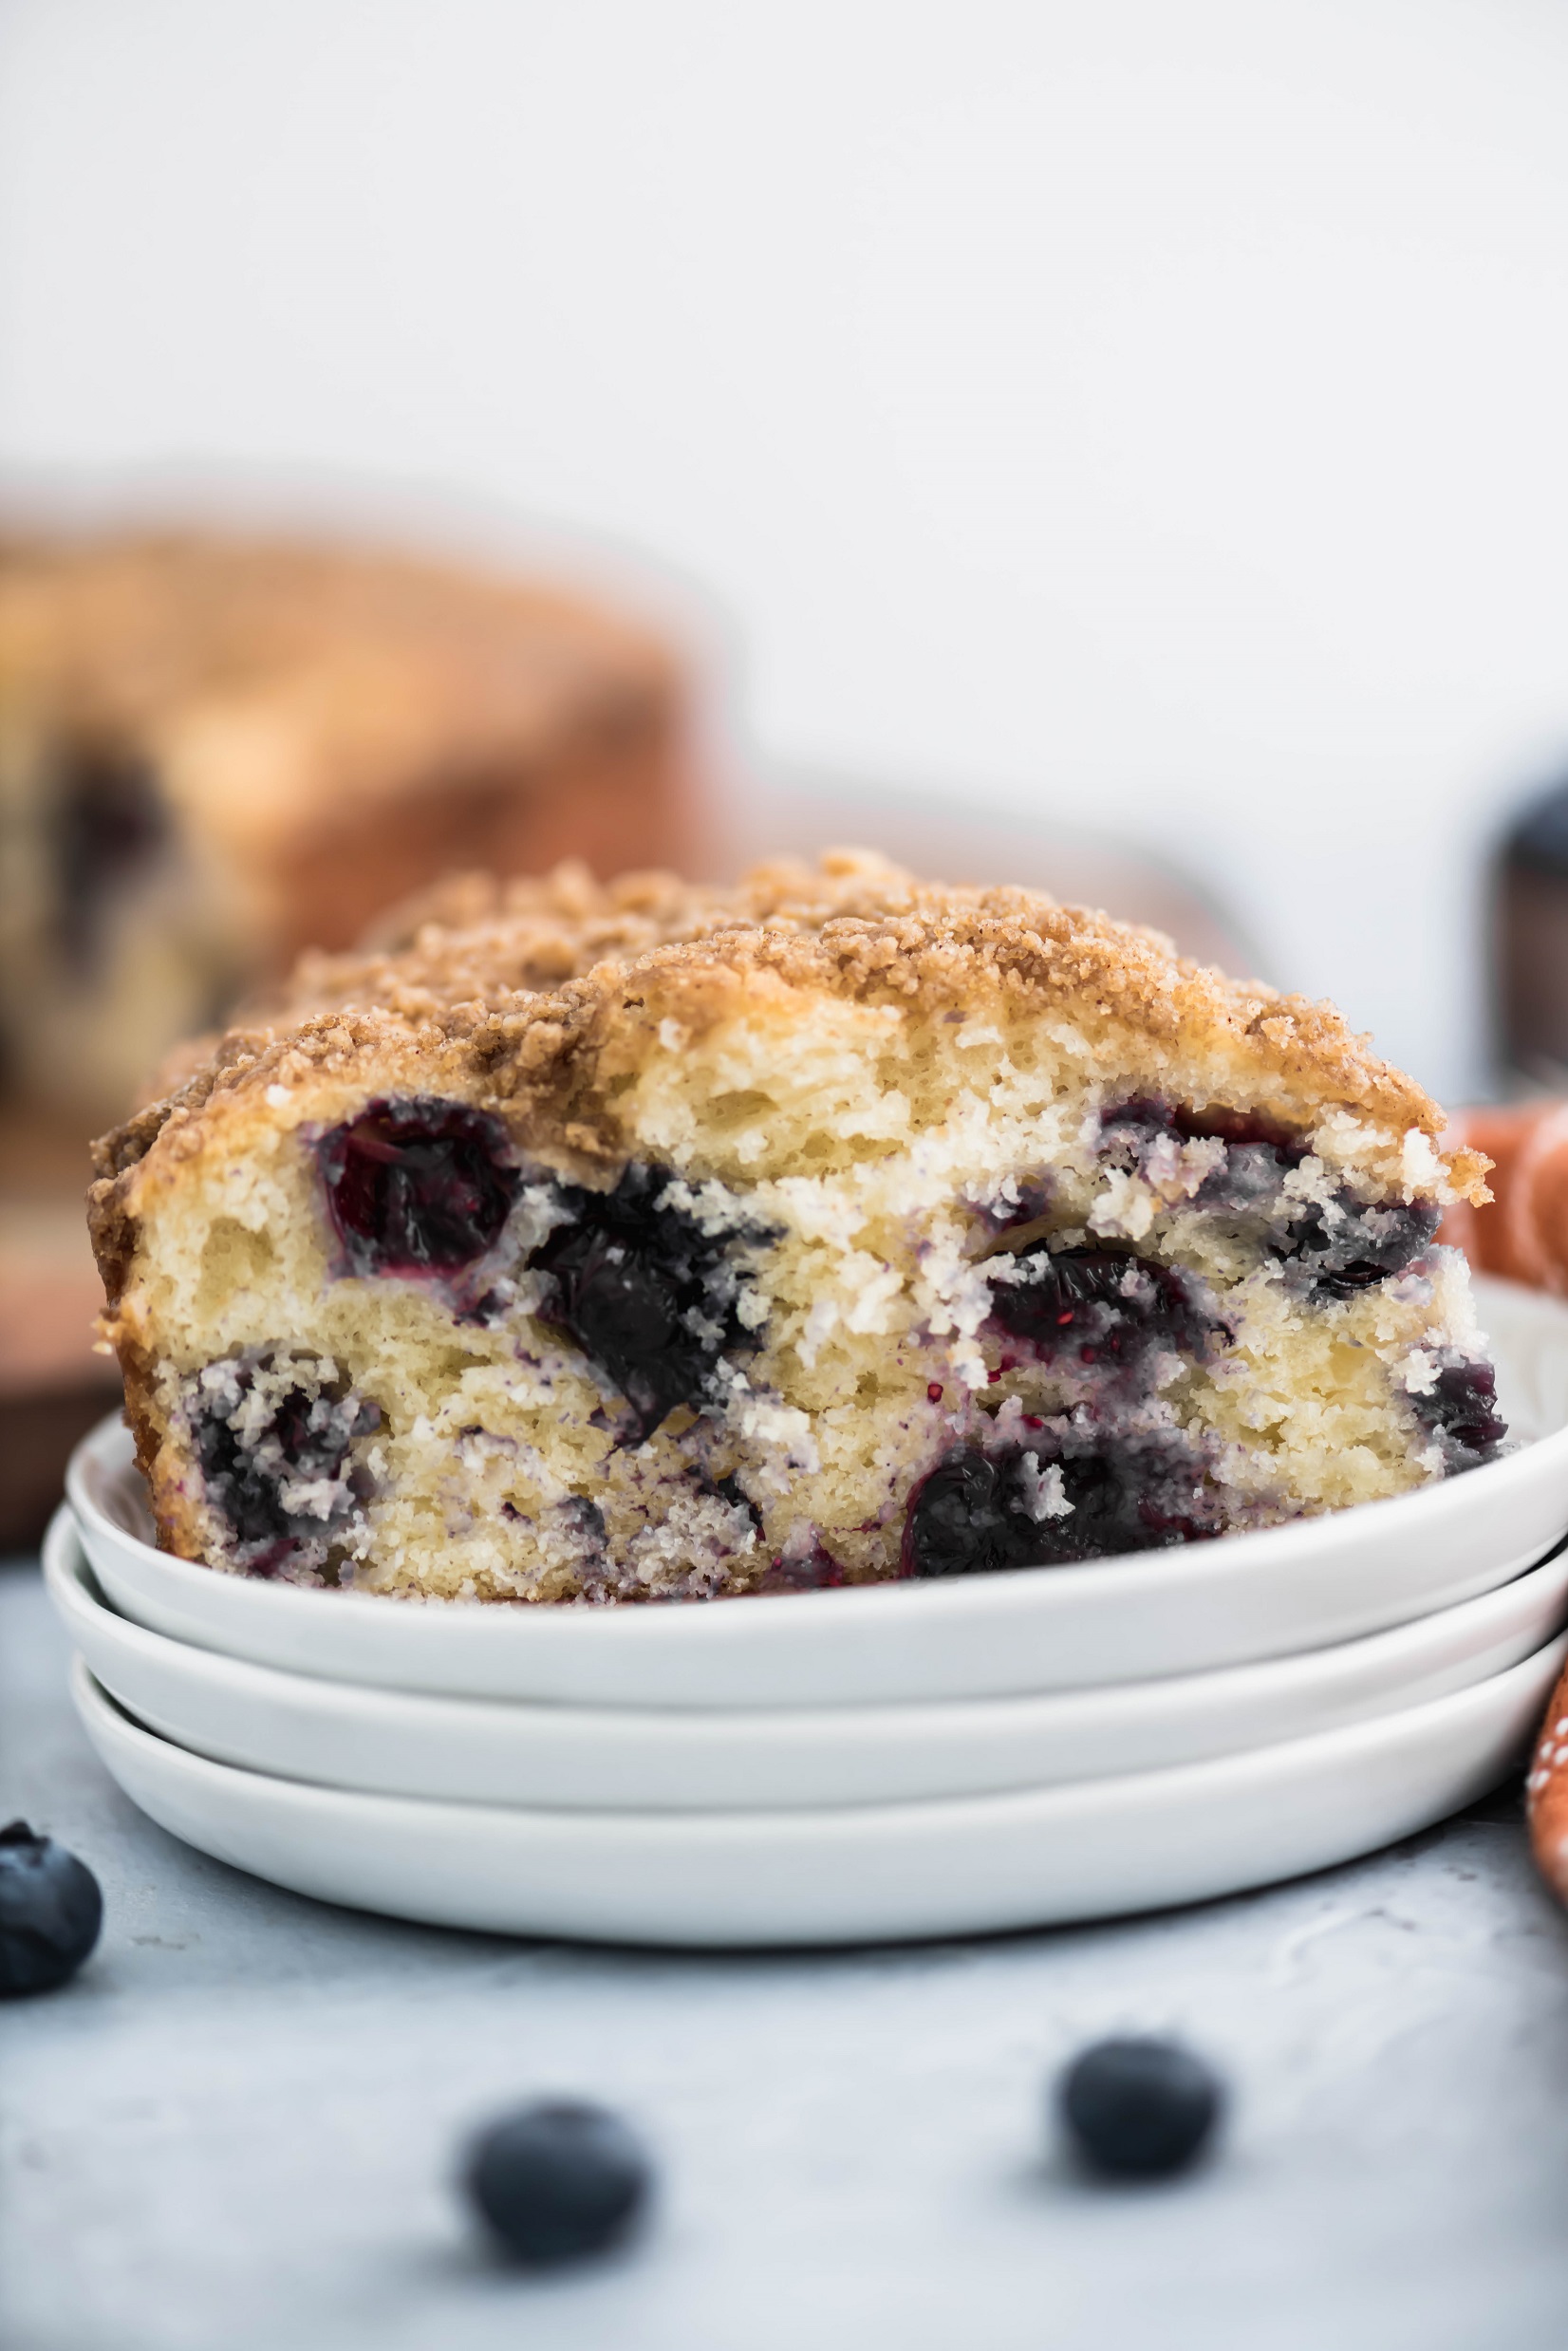 Blueberry Yogurt Coffee Cake is bursting with fresh, juicy blueberries and topped with sweet, crunchy streusel. Greek yogurt makes it perfectly moist.